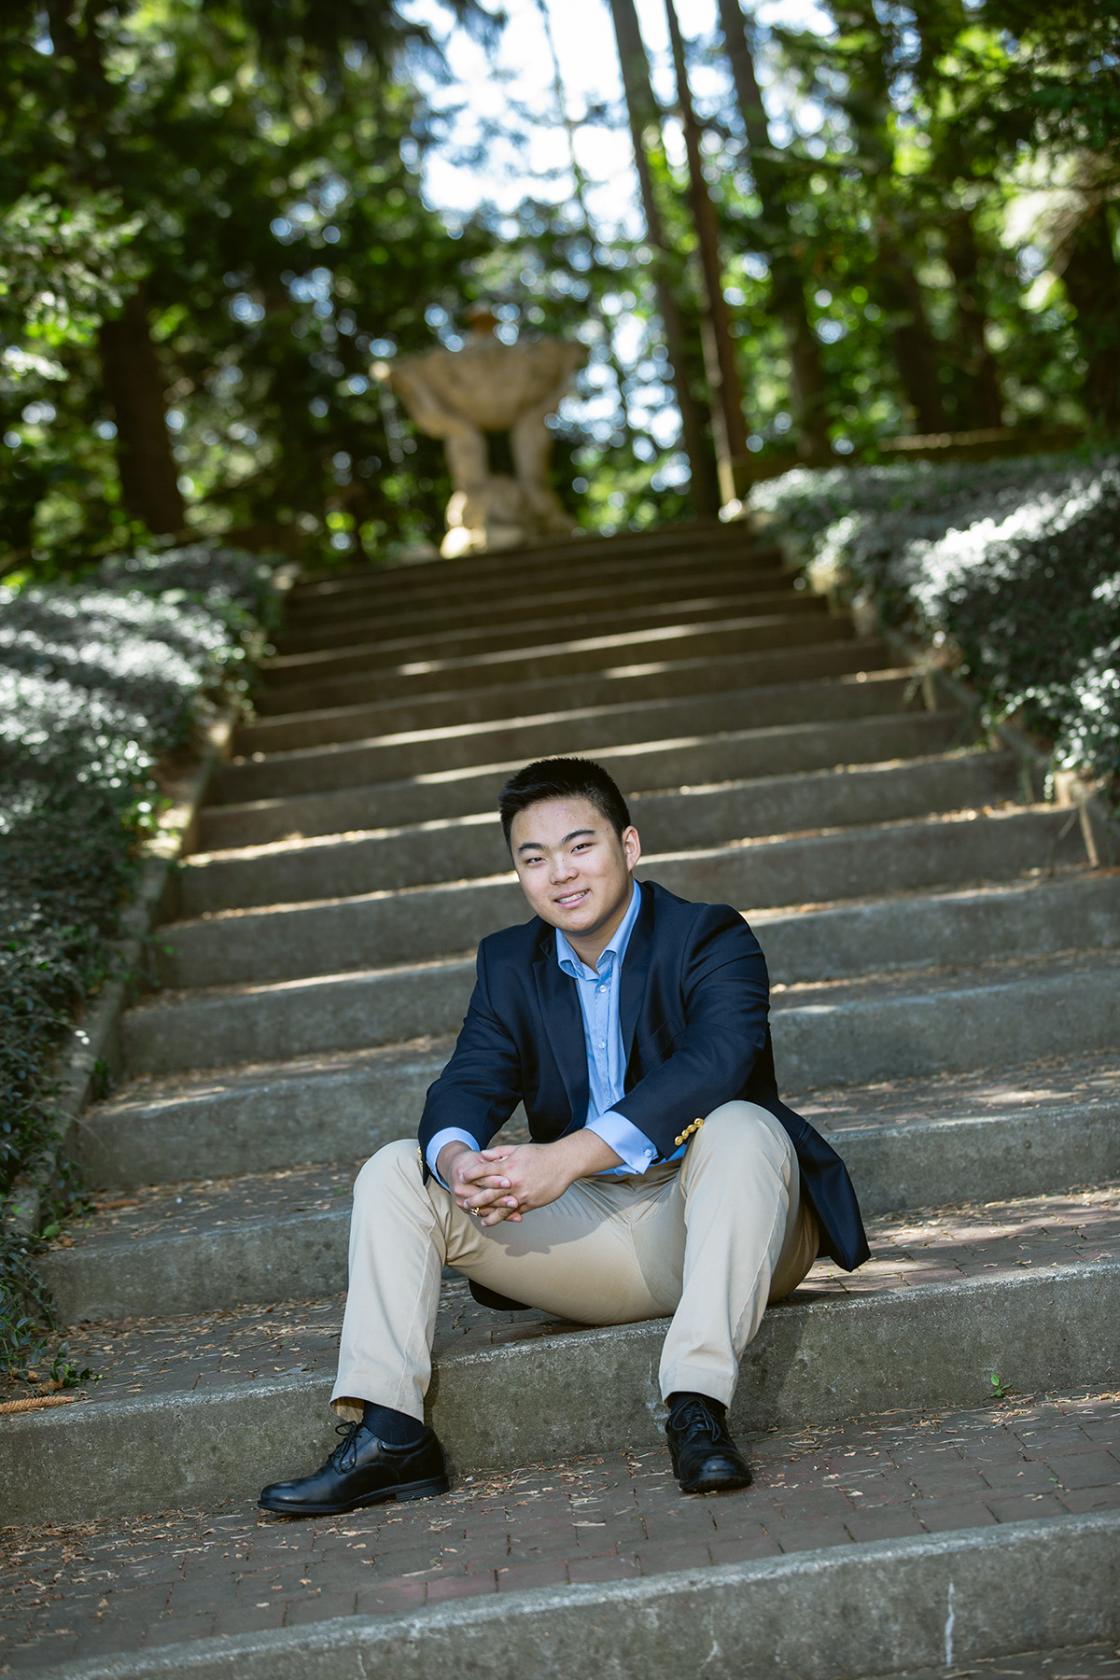 Photograph of someone in a suit sitting on the steps to The Mountain.